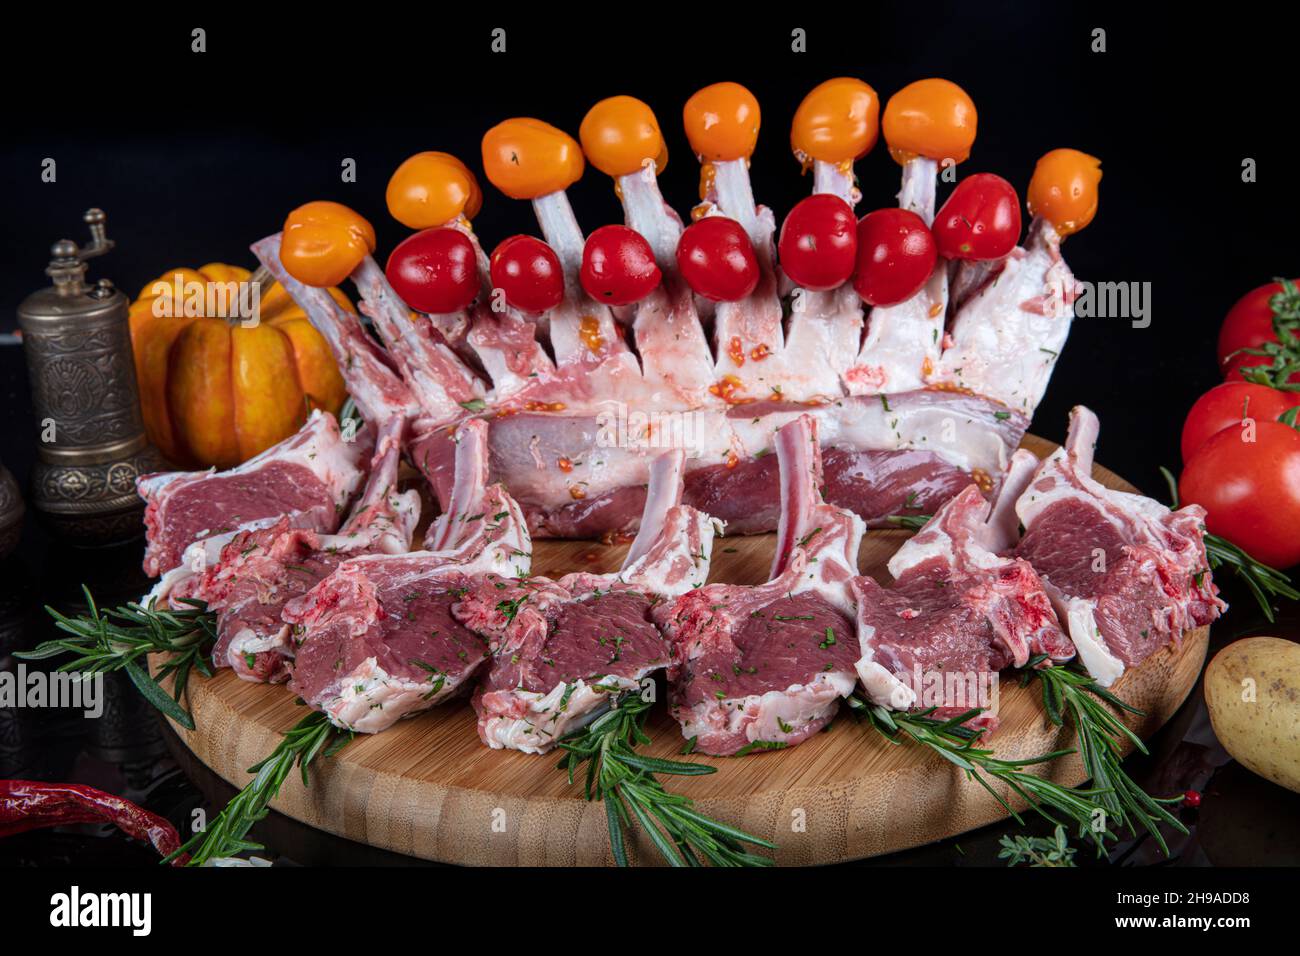 Raw fresh rack of lamb with green herbs. Racks of lamb ready for cooking on dark background. Raw ribs with a rosemary and vegetables. Stock Photo